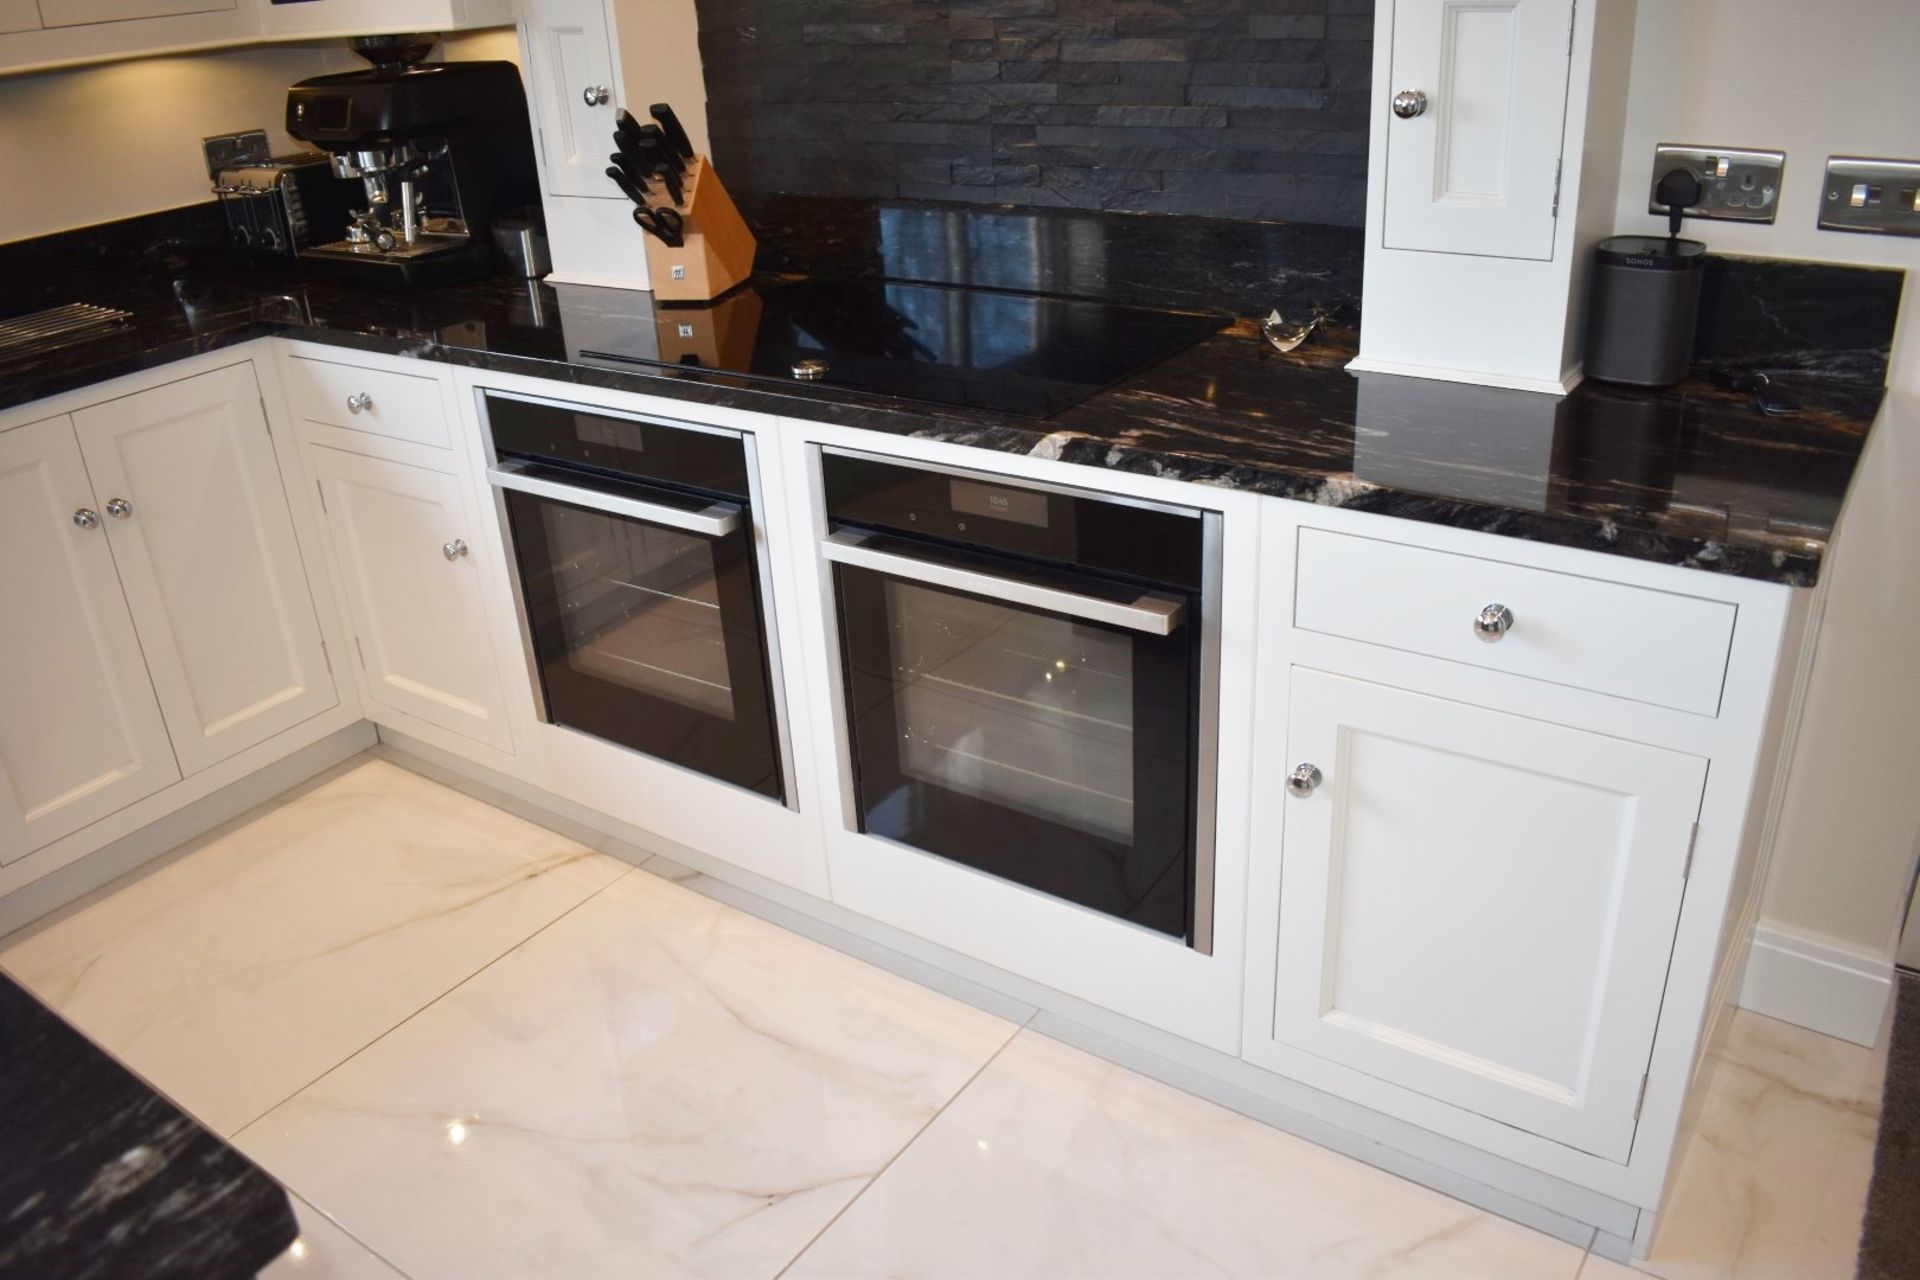 1 x Bespoke Handmade Framed Fitted Kitchen By Matthew Marsden Furniture - Features Hand Painted - Image 47 of 97